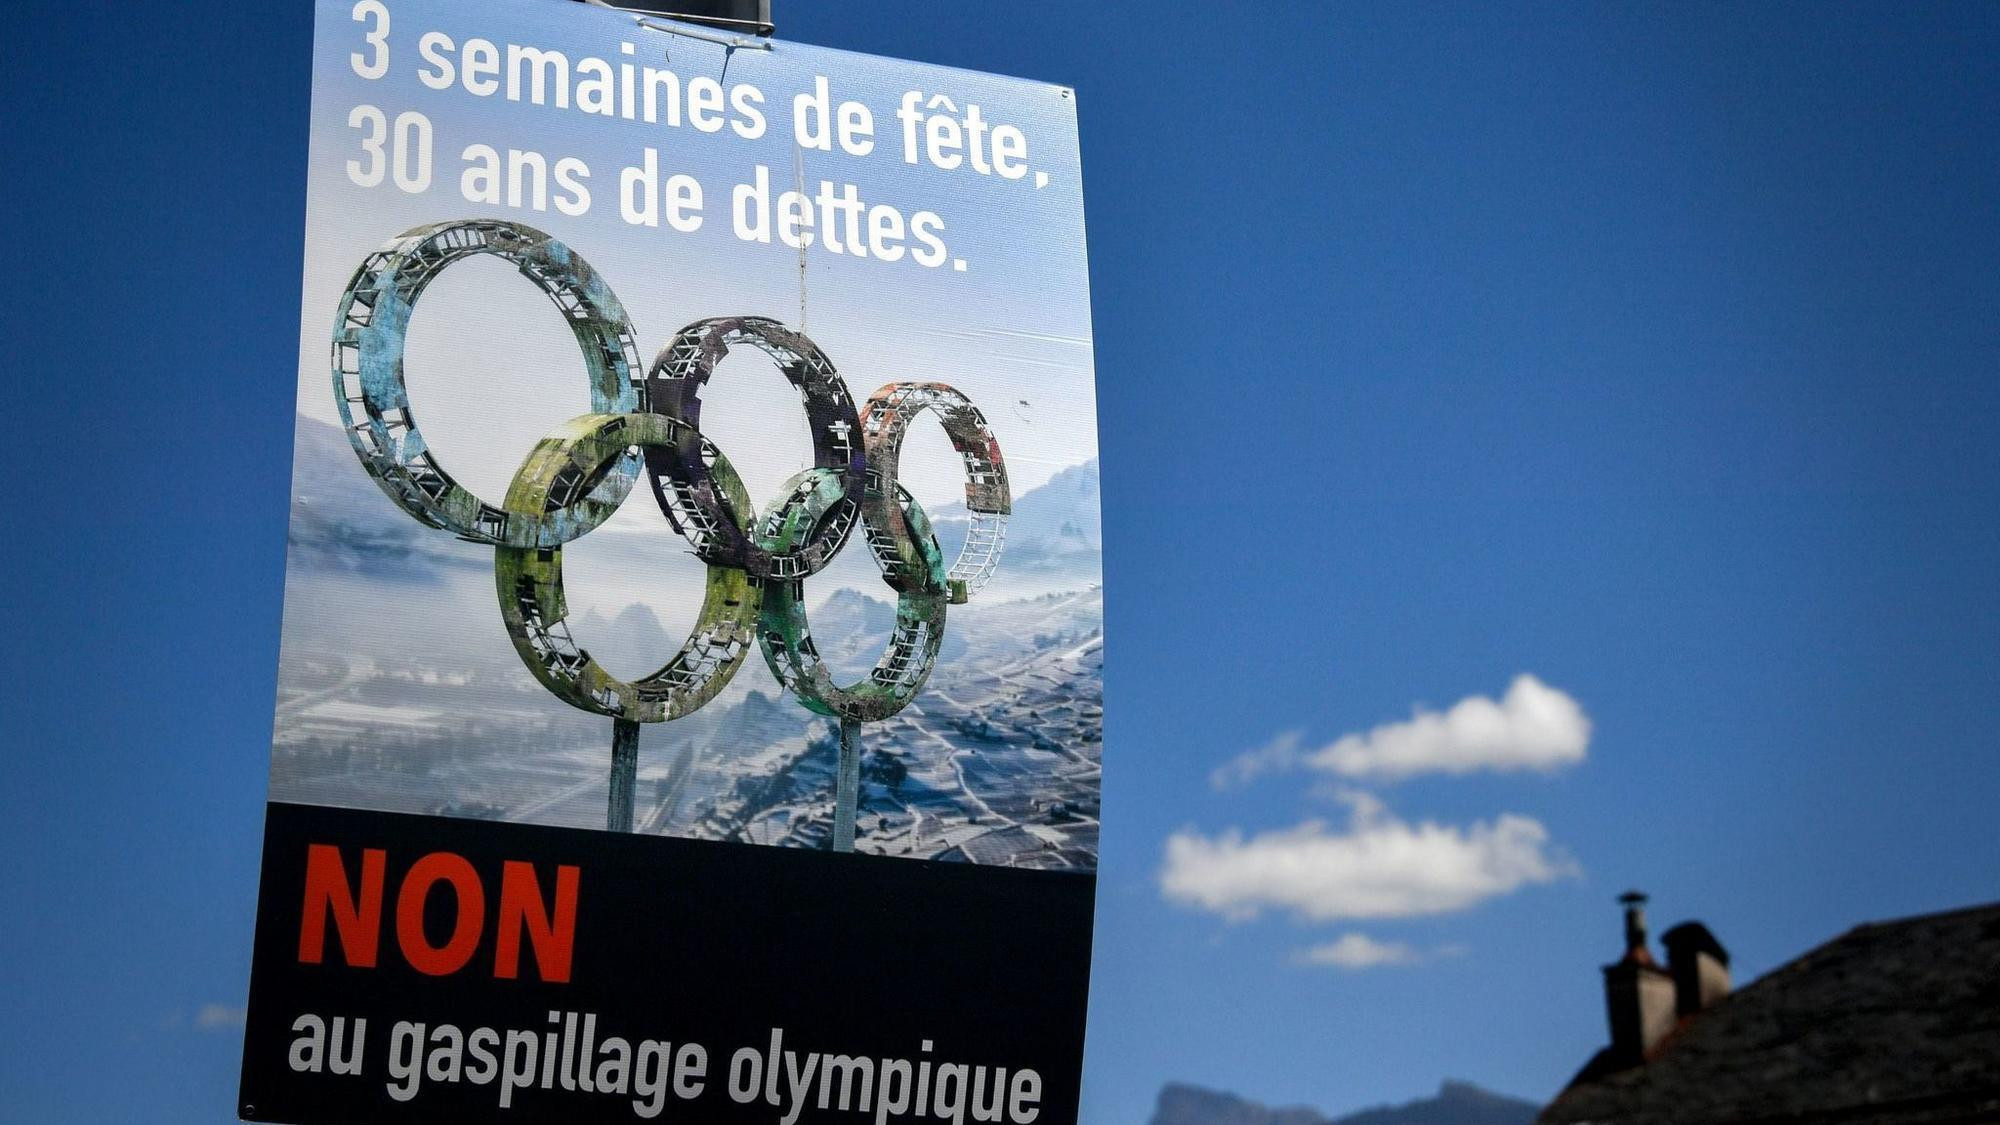 Sion's bid for the 2026 Winter Olympic Games was killed by a referendum, which it could be argued was partly because taxpayers misunderstood the meaning of the word 